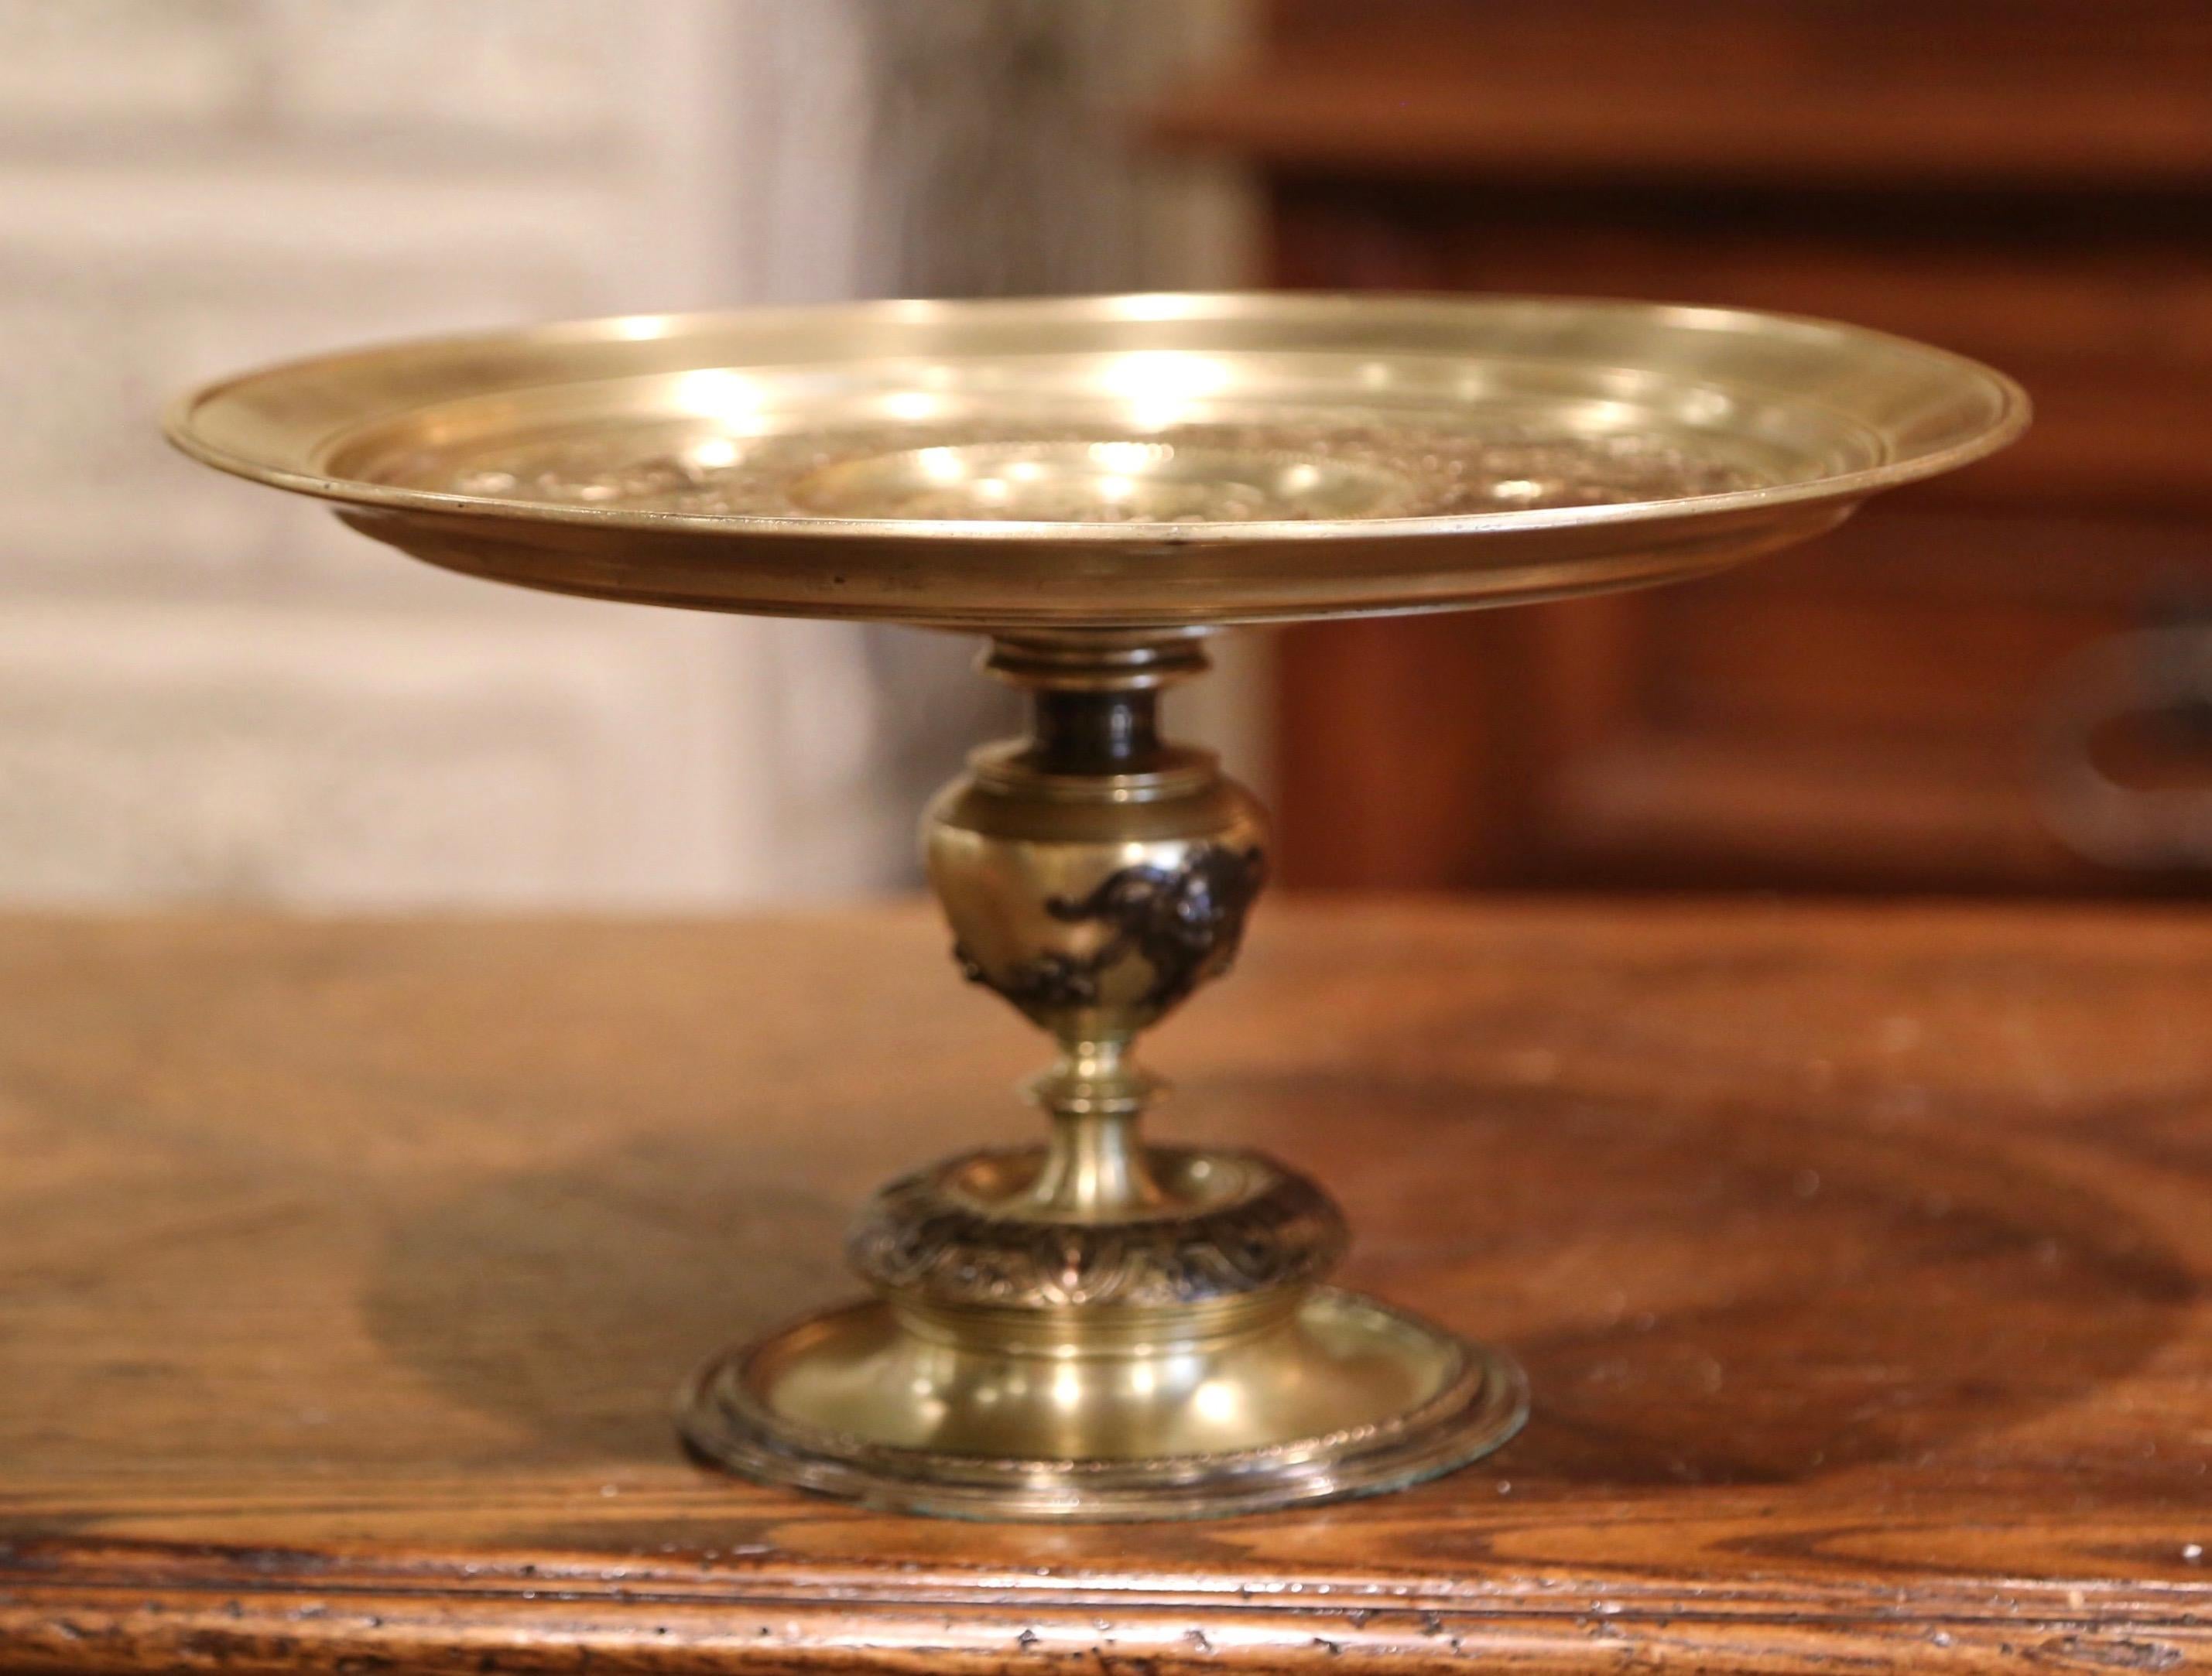 This elegant, antique bronze centerpiece was crafted in France, circa 1920. The shallow dish sits on an intricate round base; the top is decorated with traditional allegoric scenes and embellished with a central medallion featuring a lion figure